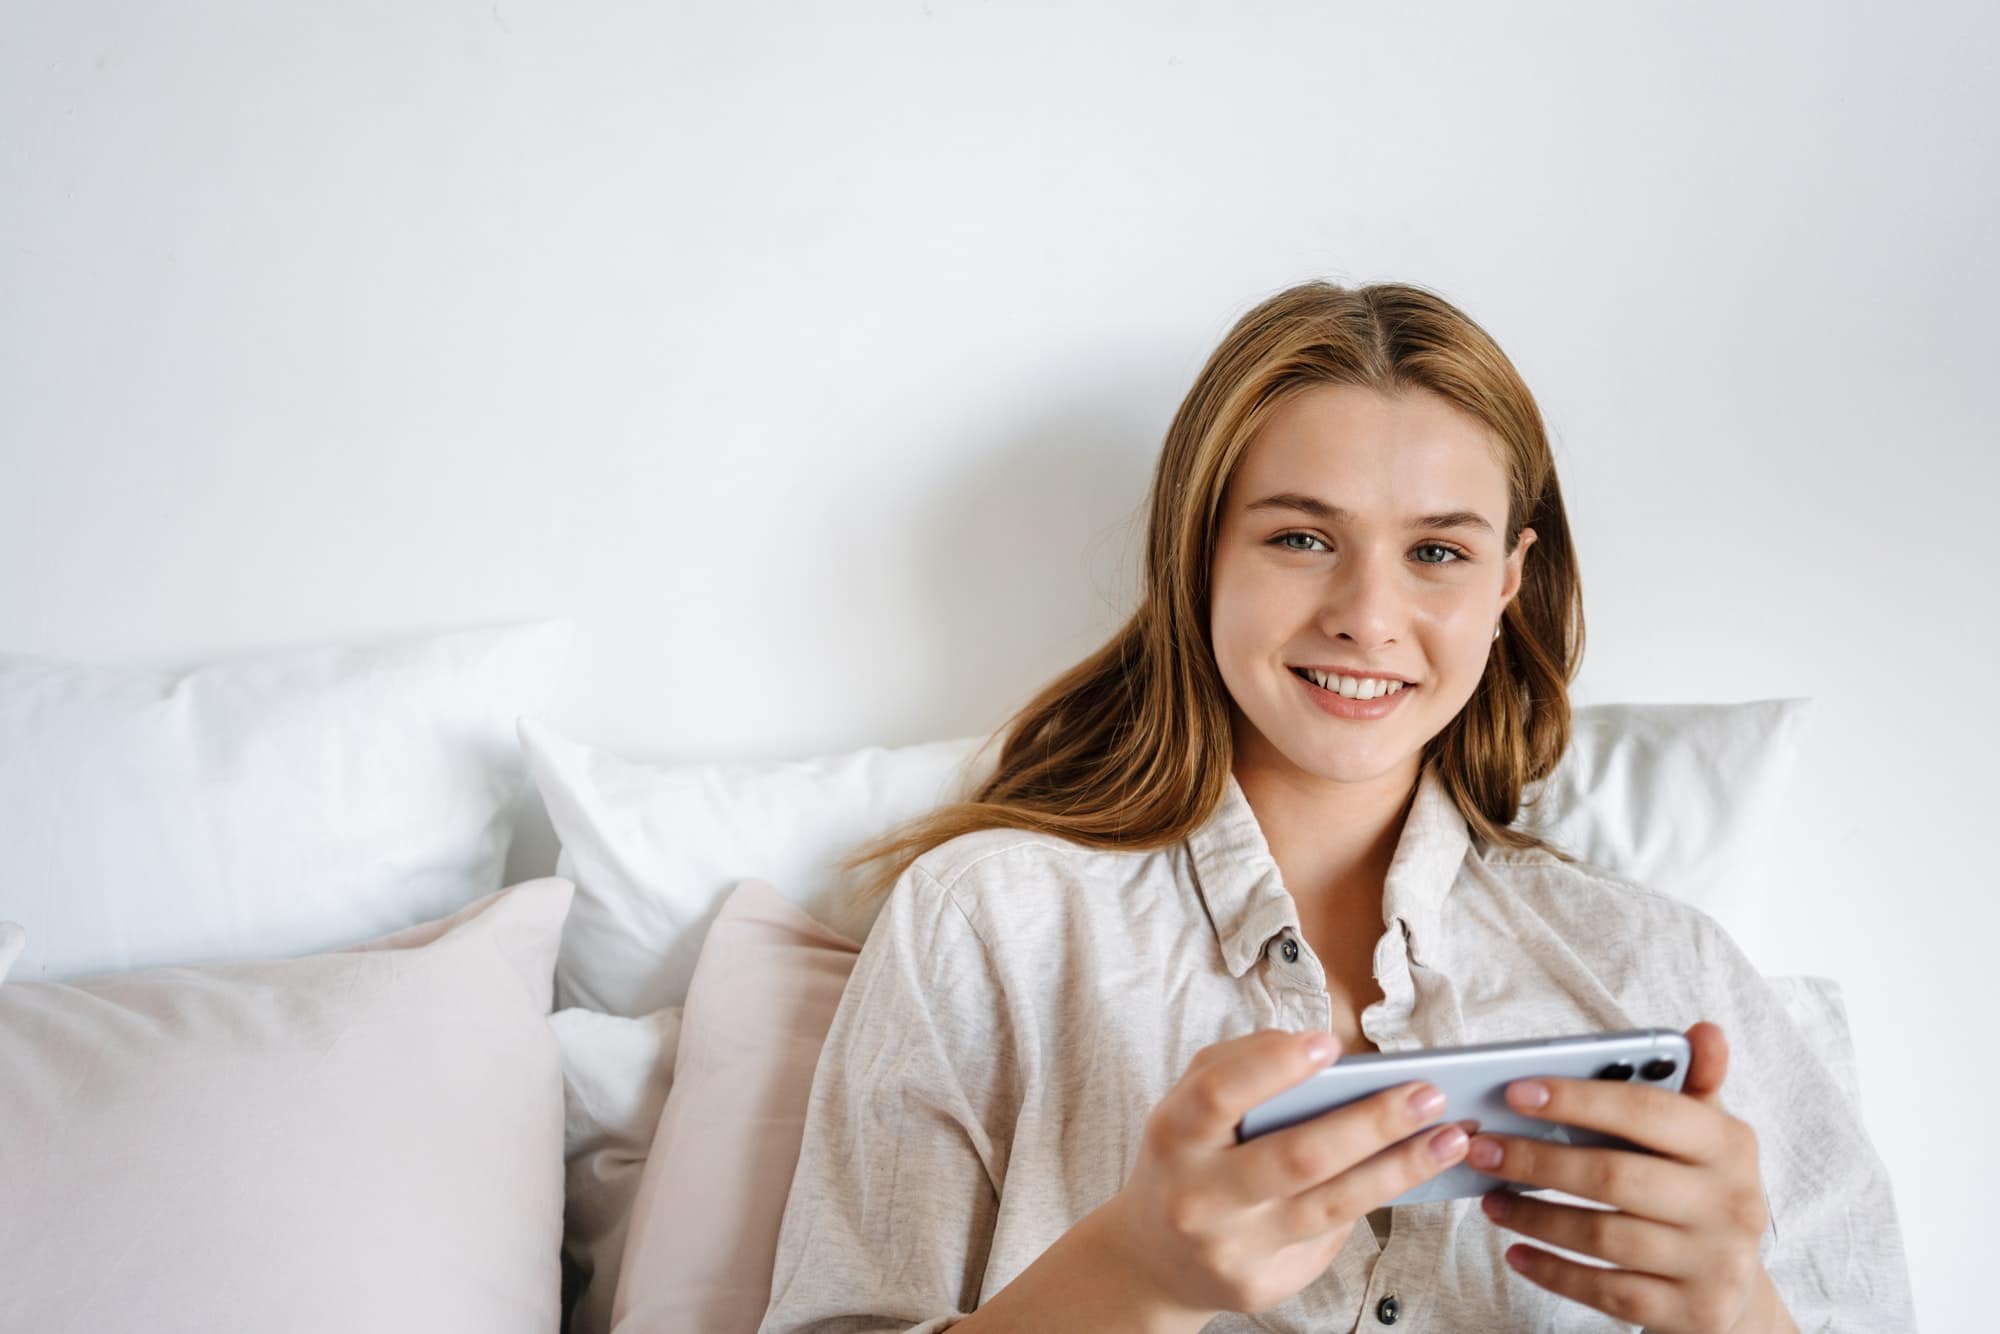 Beautiful smiling nice girl playing video game on cellphone